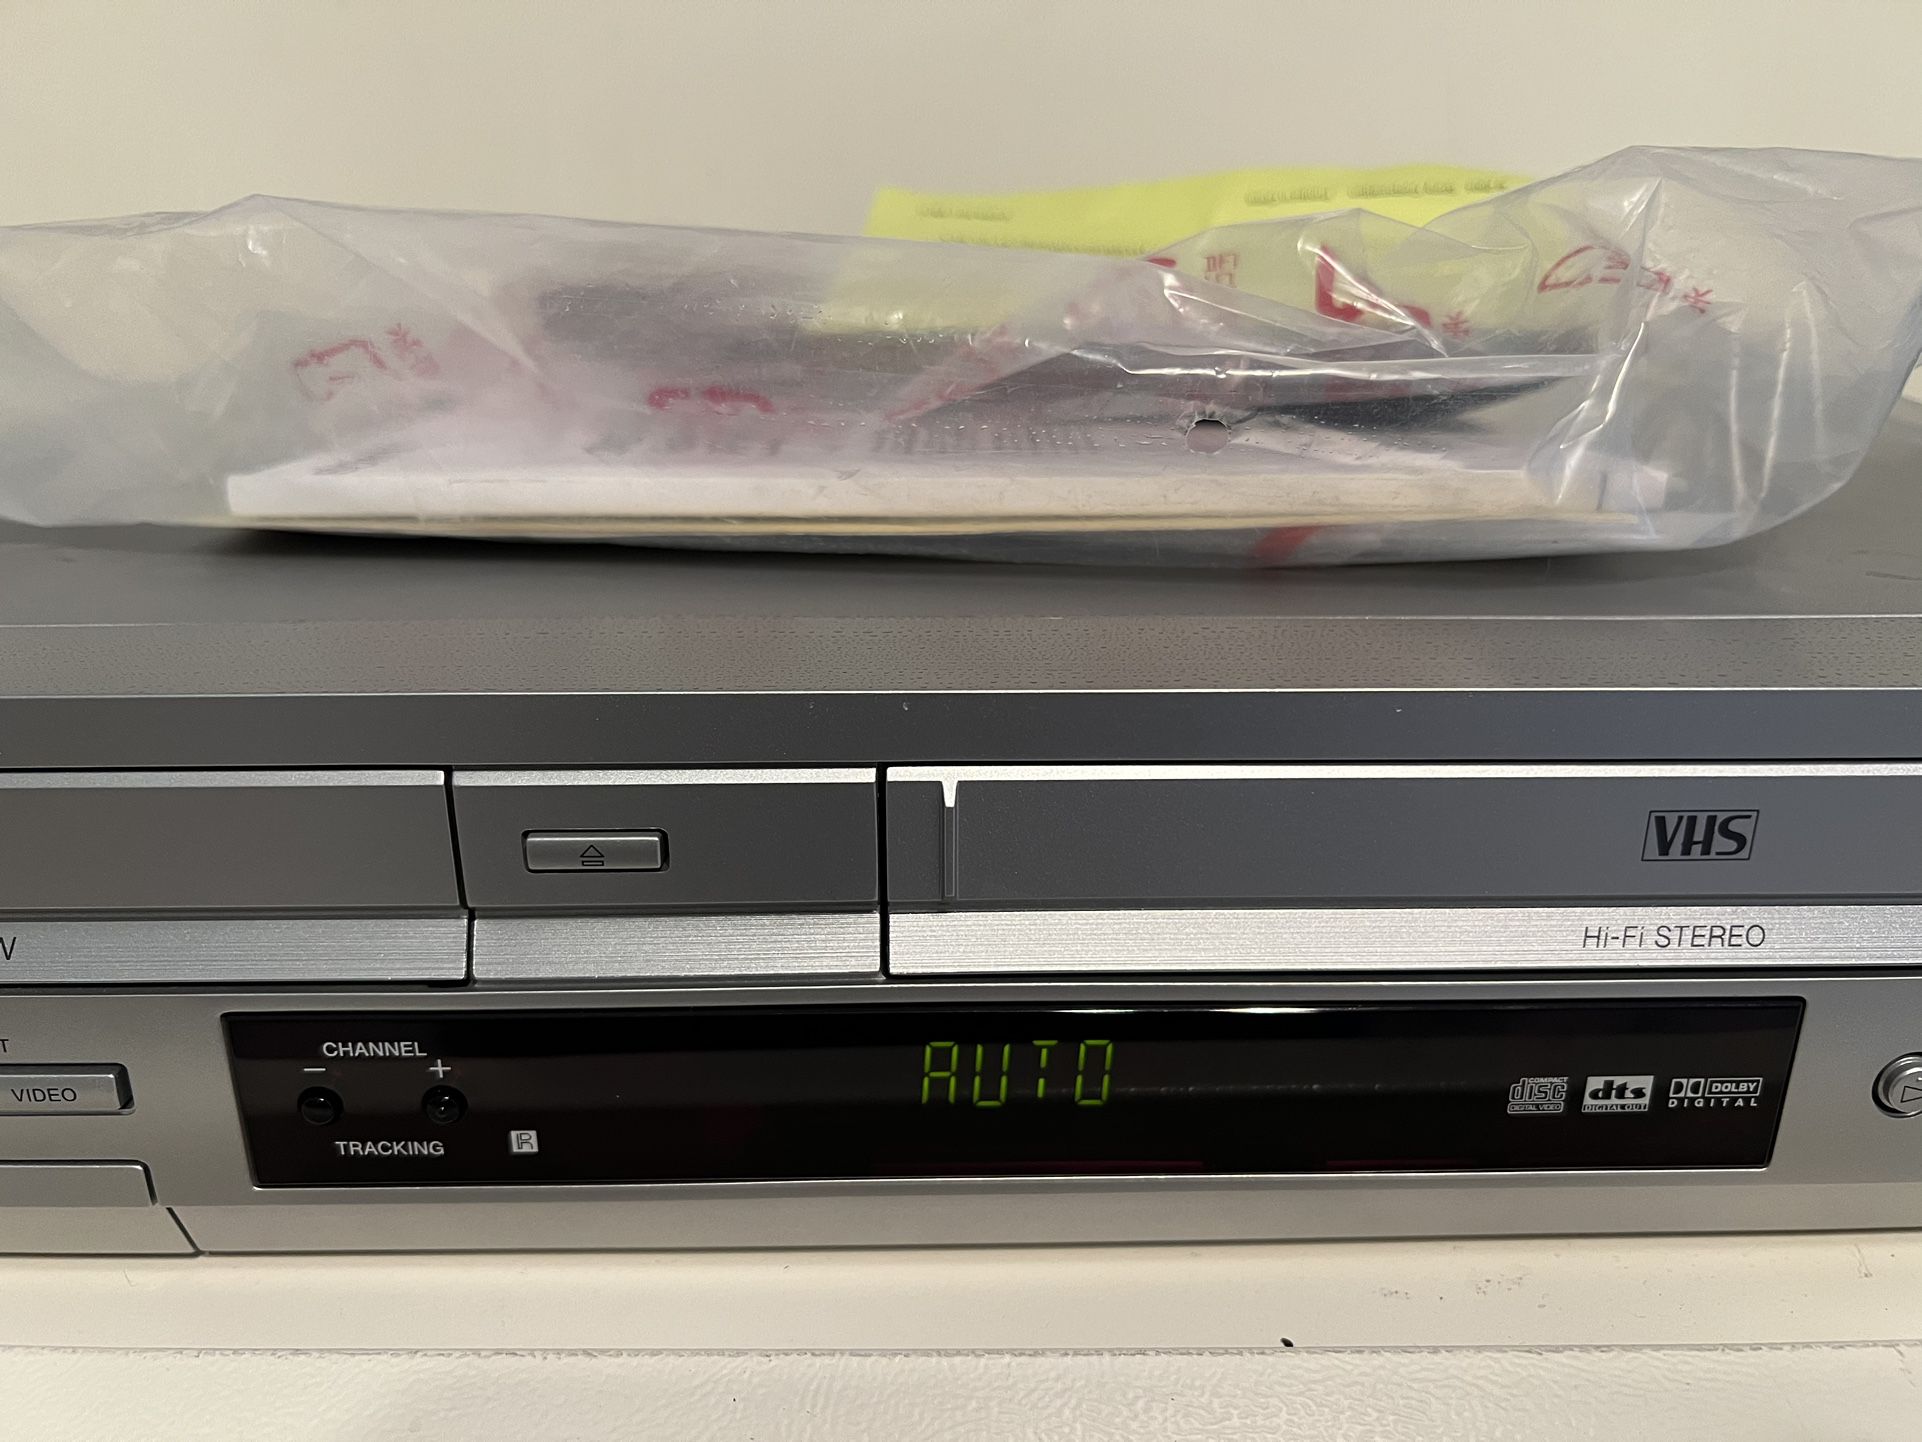 Sony SLV-D350P DVD/VCR Combo Player